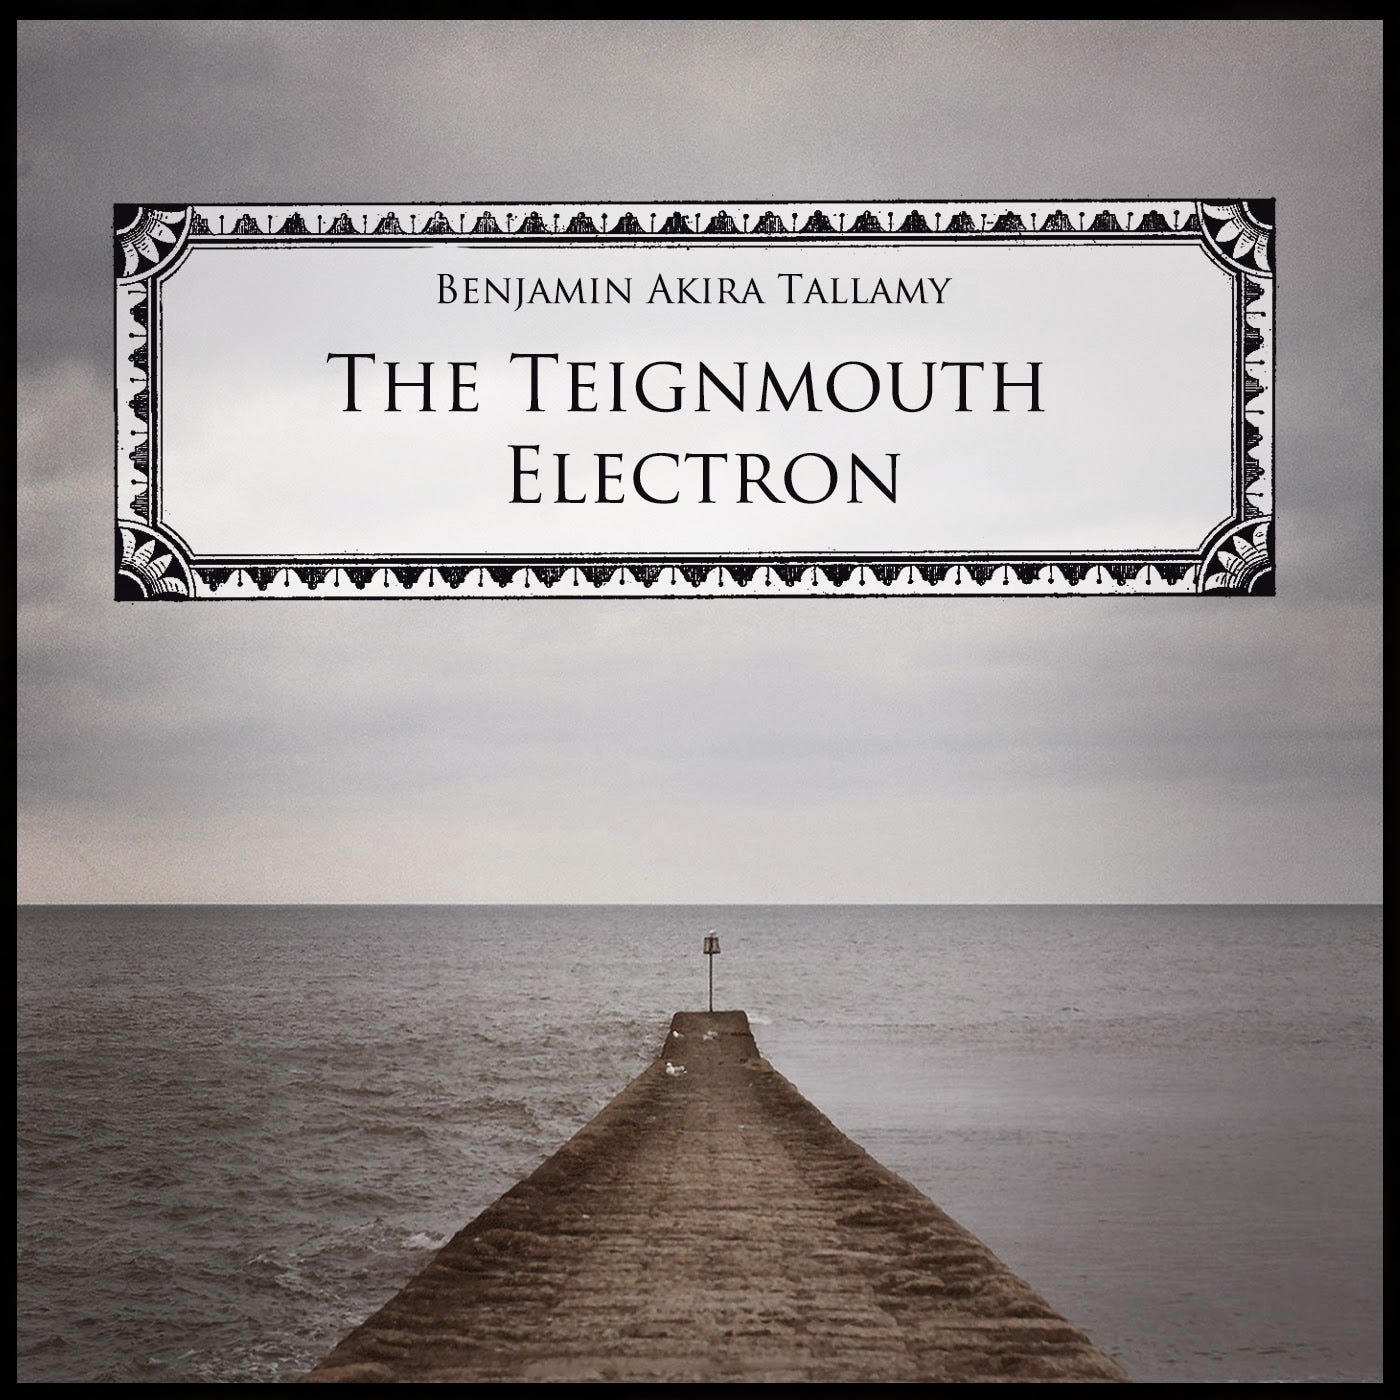 The Teignmouth Electron single - photo by Emily Ings